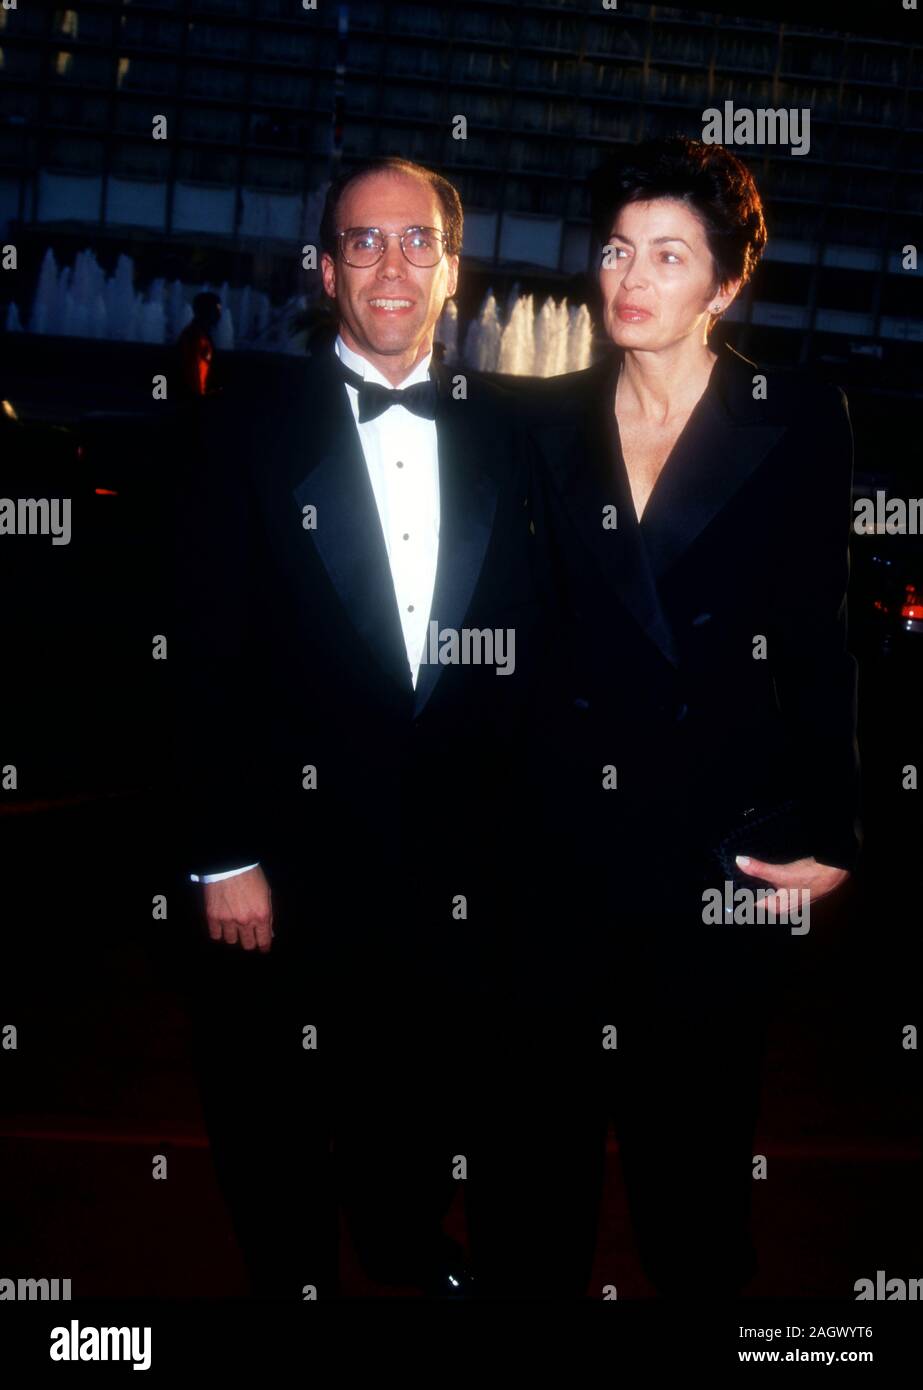 Century City, California, USA 13th April 1995 Producer Jeffrey Katzenberg and wife Marilyn Katzenberg attend the 'Beauty and the Beast' Musical Performance on April 13, 1995 at Shubert Theatre in Century City, California, USA. Photo by Barry King/Alamy Stock Photo Stock Photo